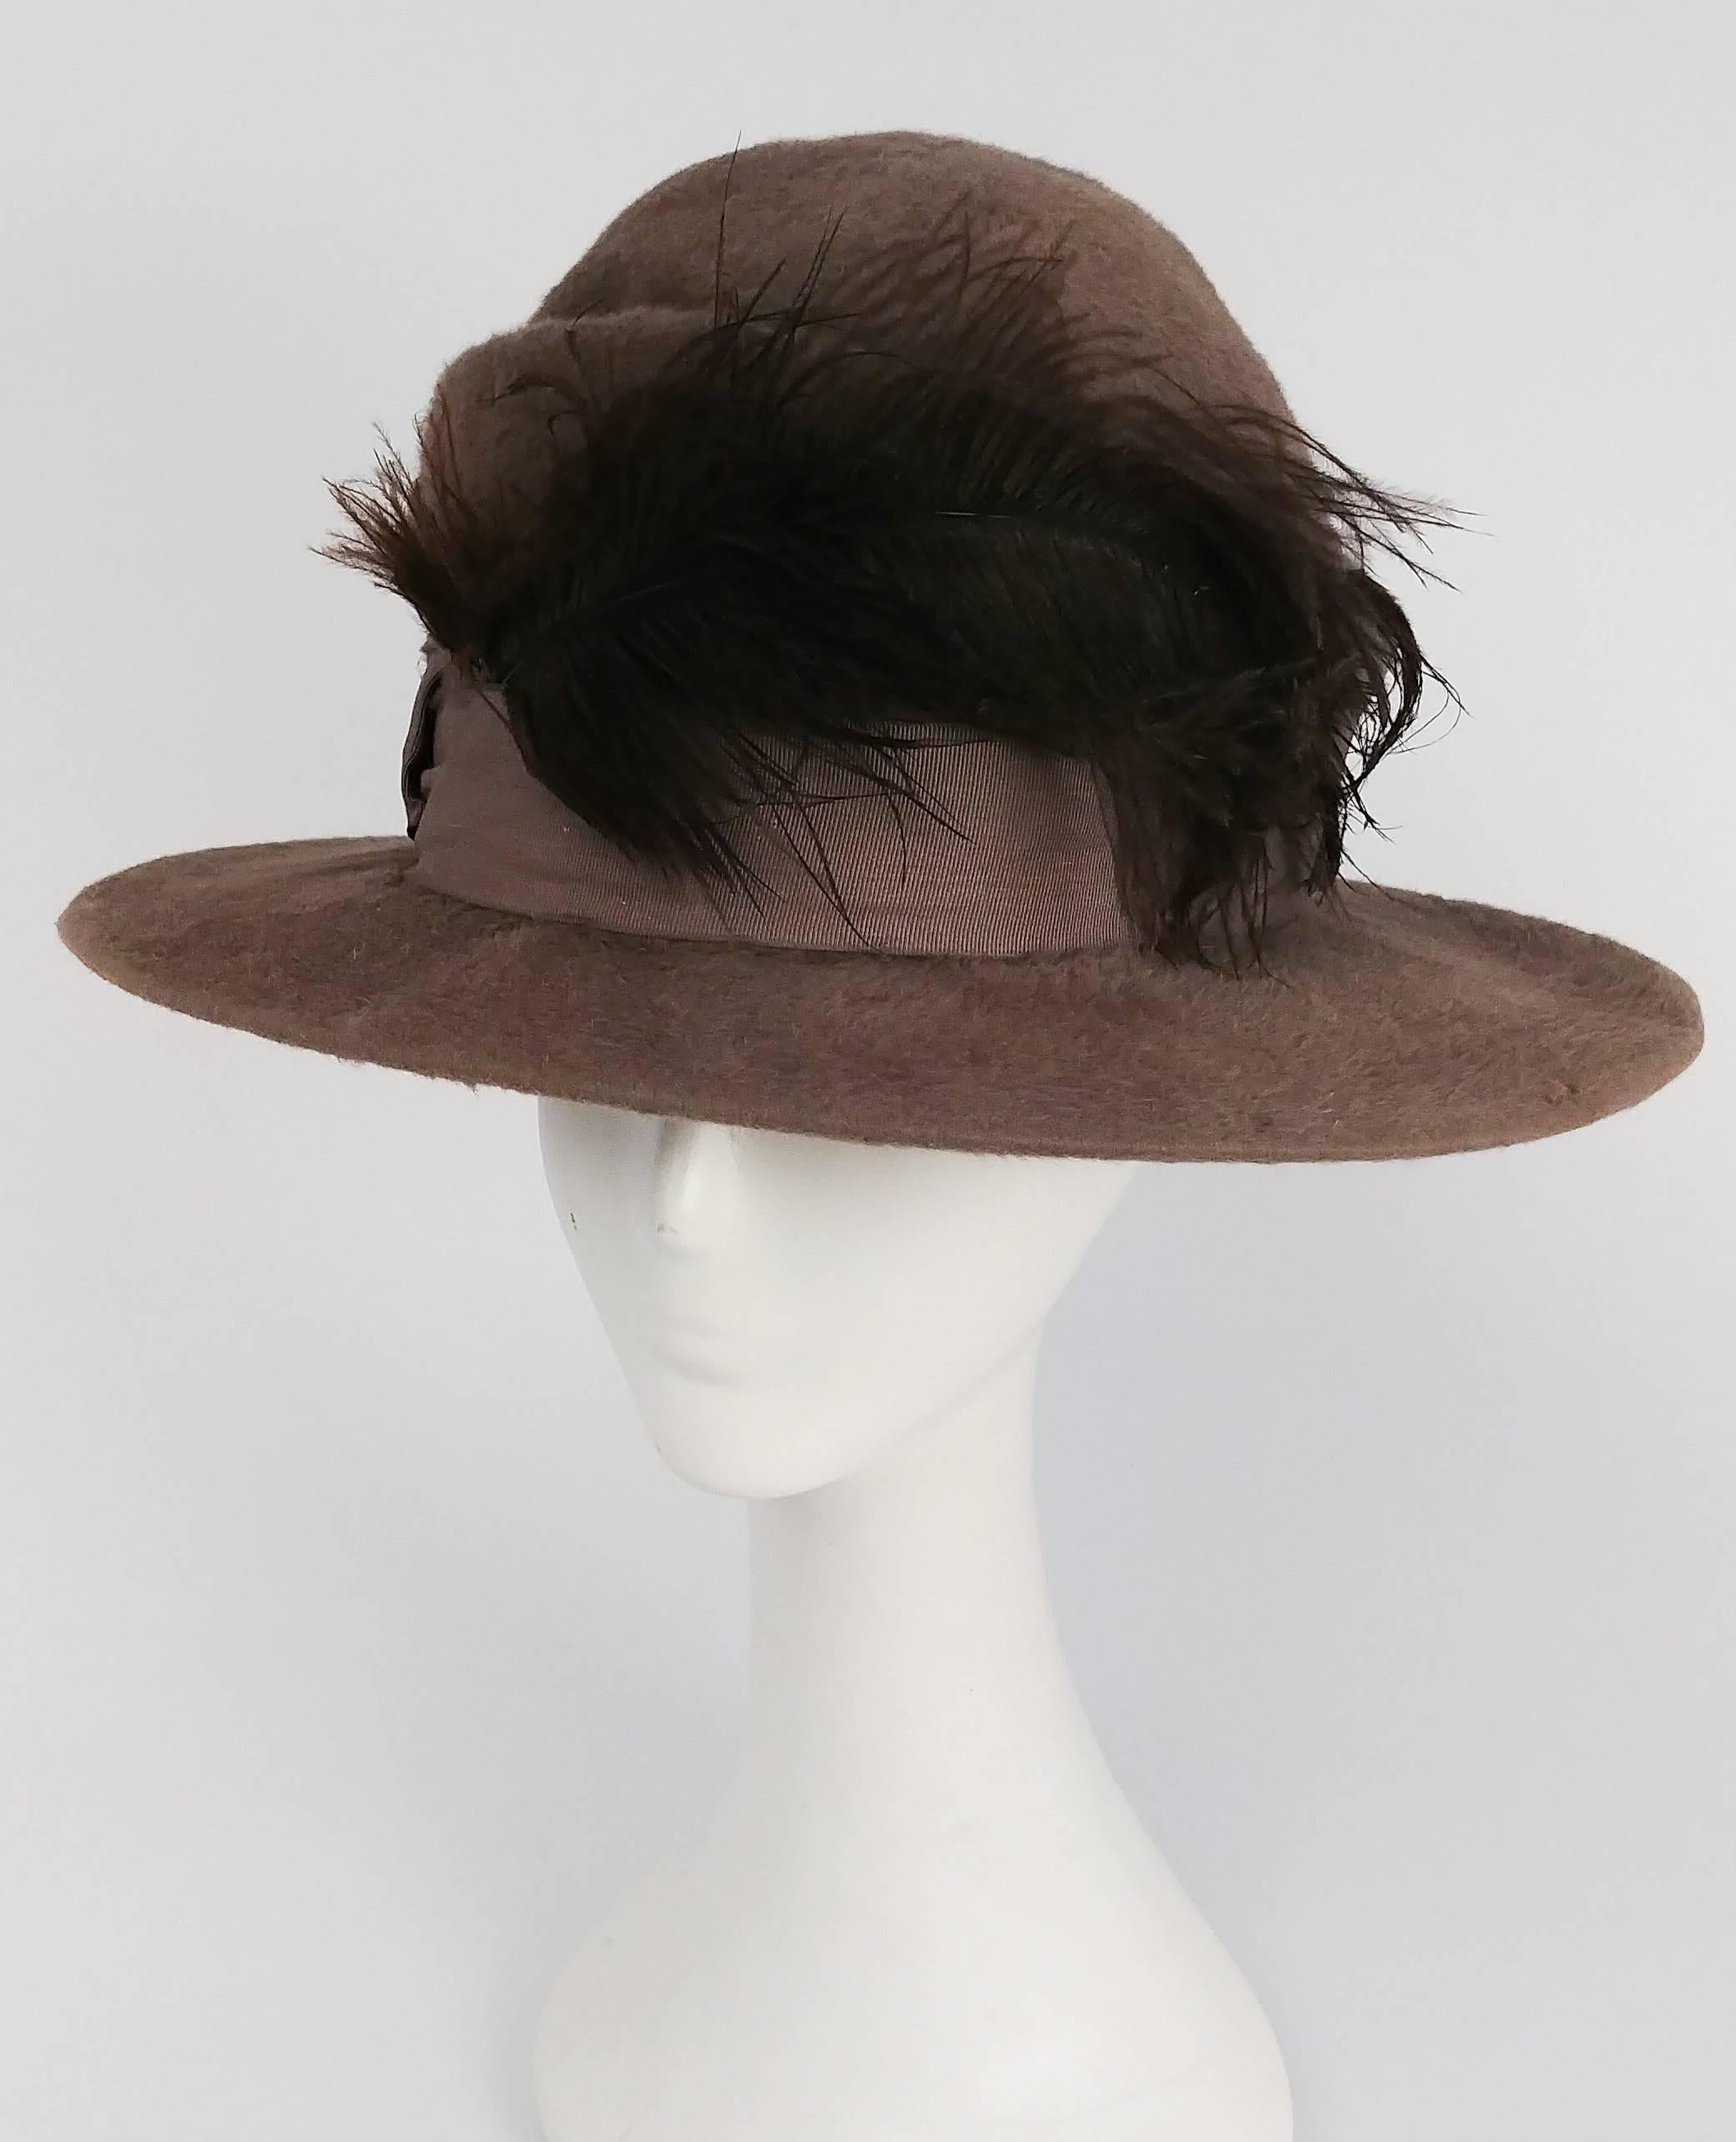 Edwardian Round Fur Felt Hat w/ Feather. Grosgrain ribbon hat band (slight marks shown in photo) with brown feather and art deco brooch decoration. 